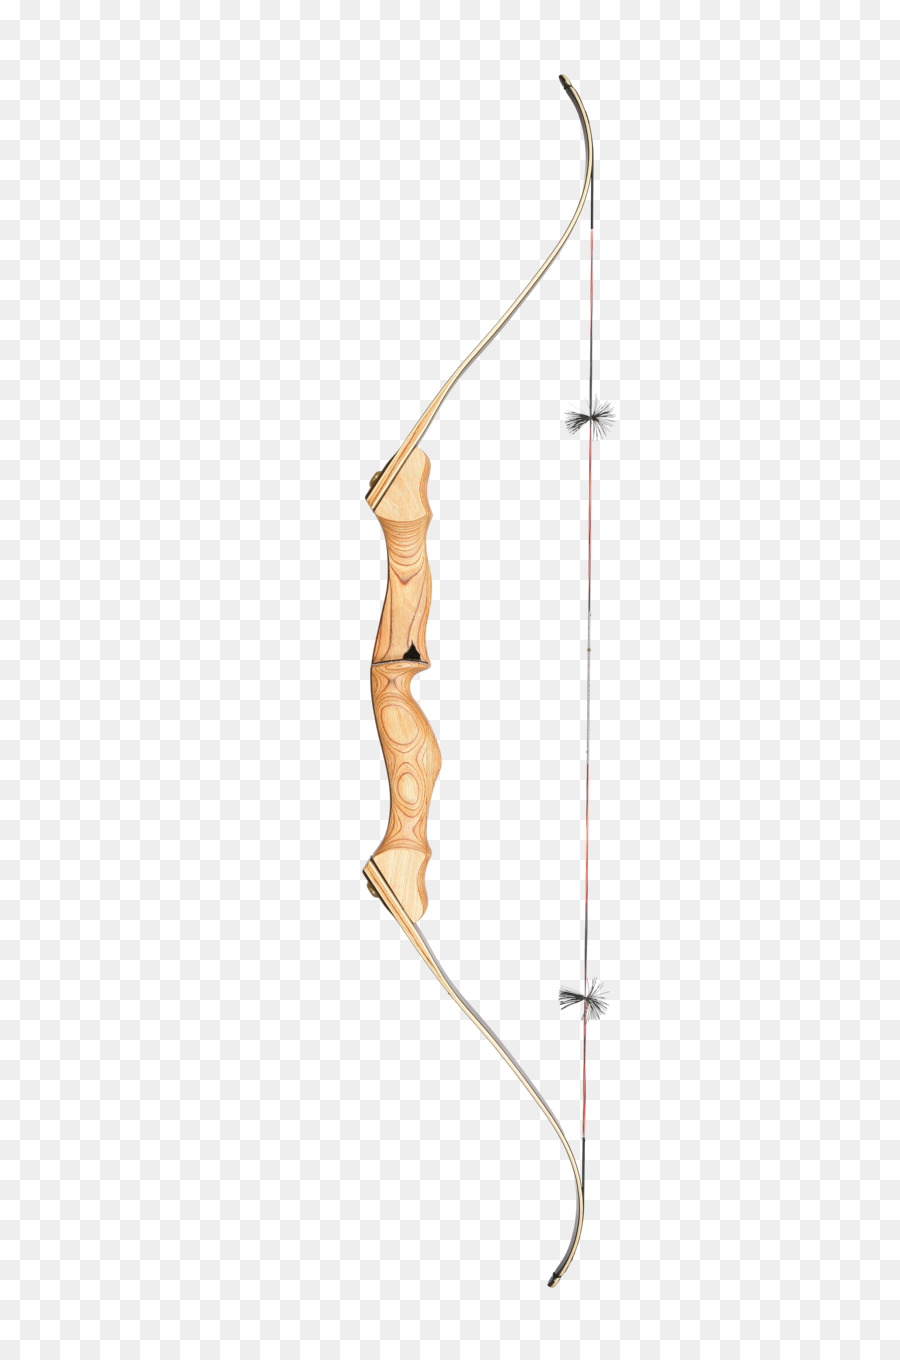 Bow and arrow Recurve bow Archery - bow png download - 2912*4368 - Free Transparent Bow And Arrow png Download.